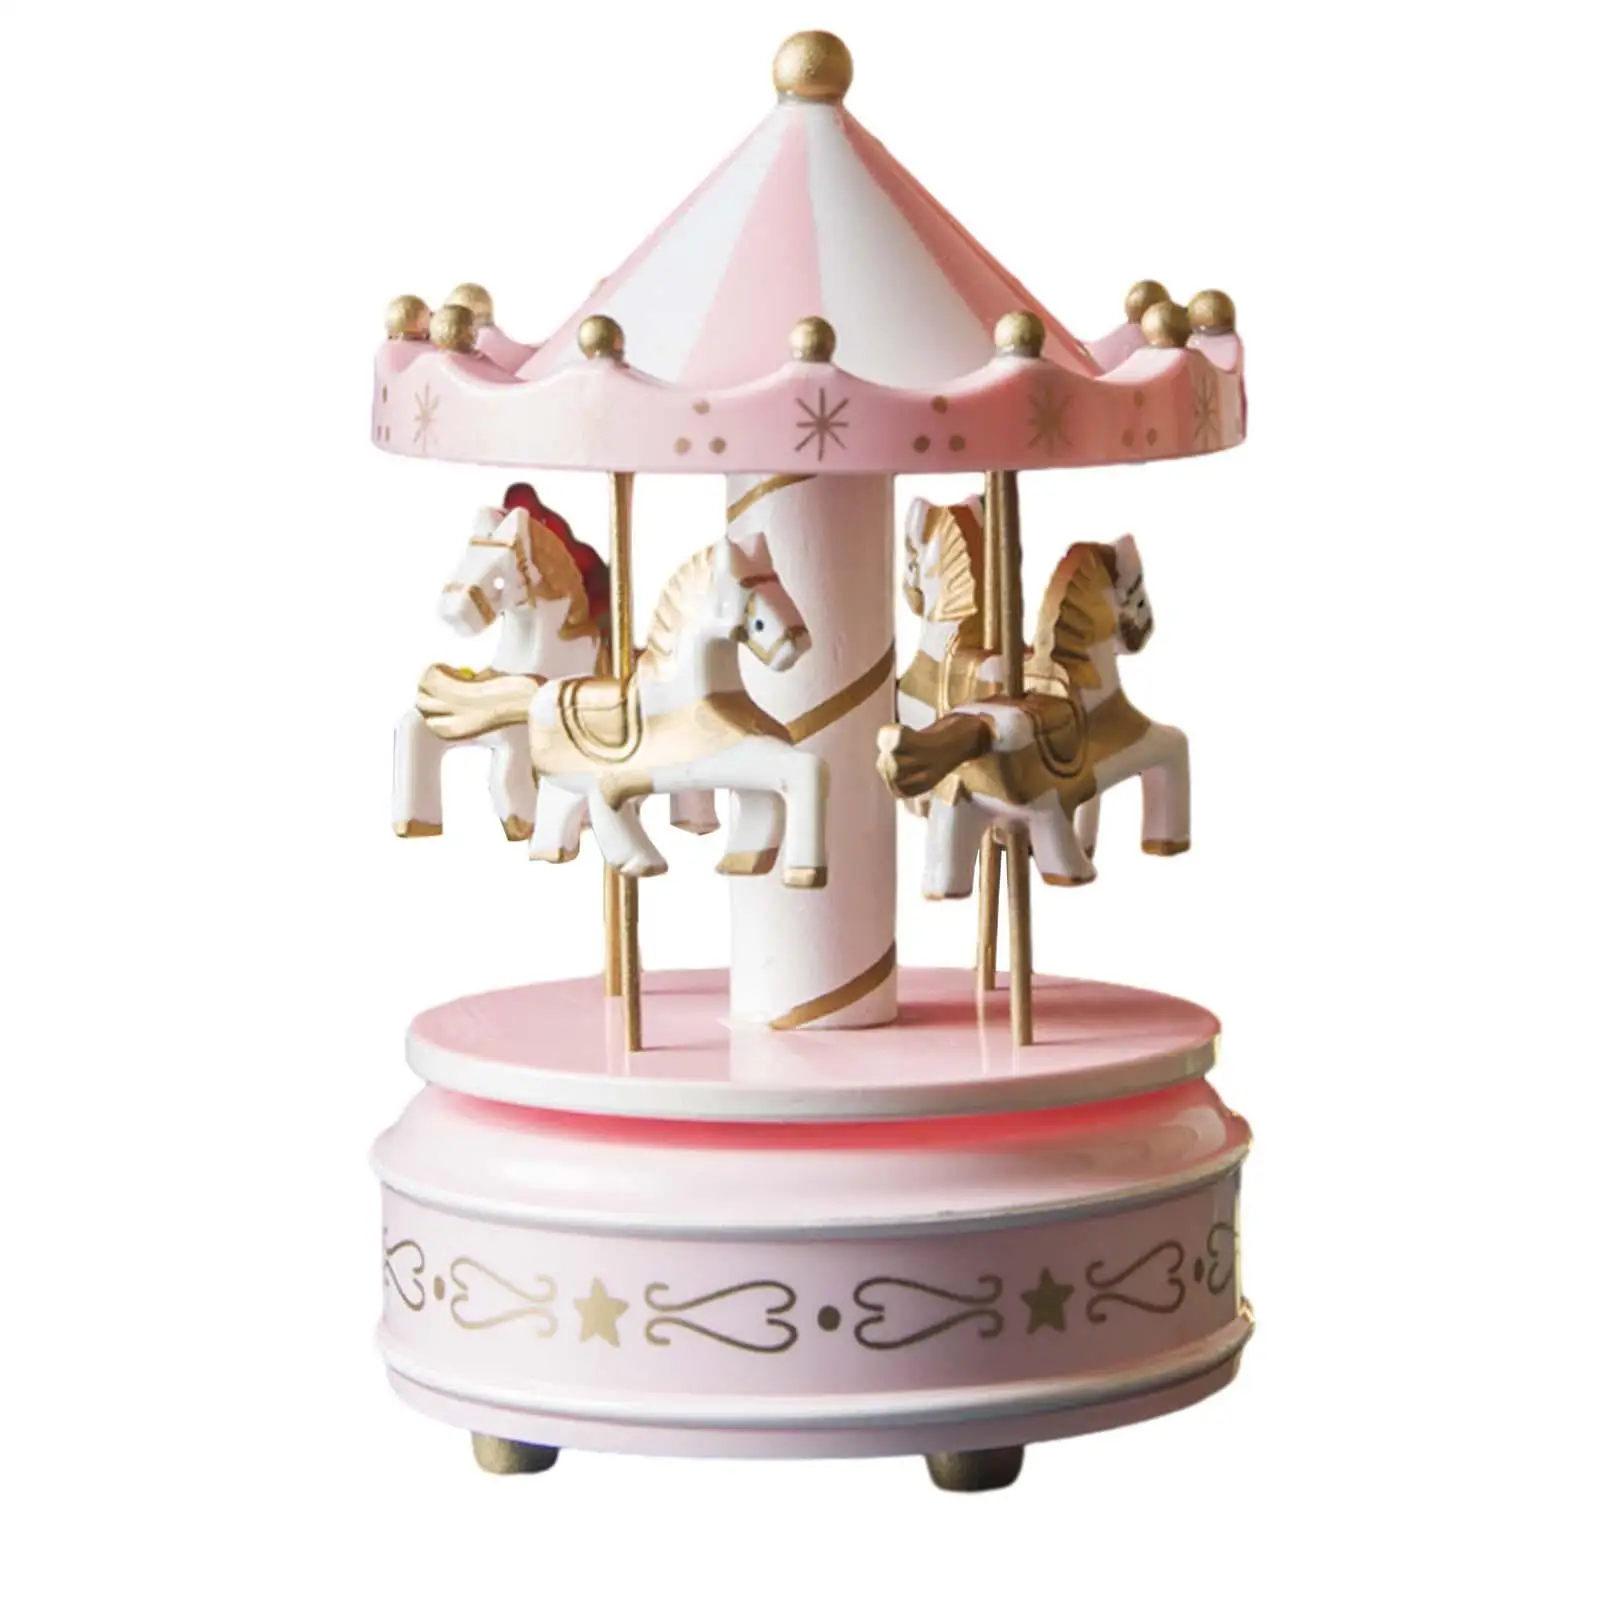 Christmas Wooden Carousel Music Box Ornament Hand Painted Turn Horse Shaped Rotating for Valentine Gift Multipurpose